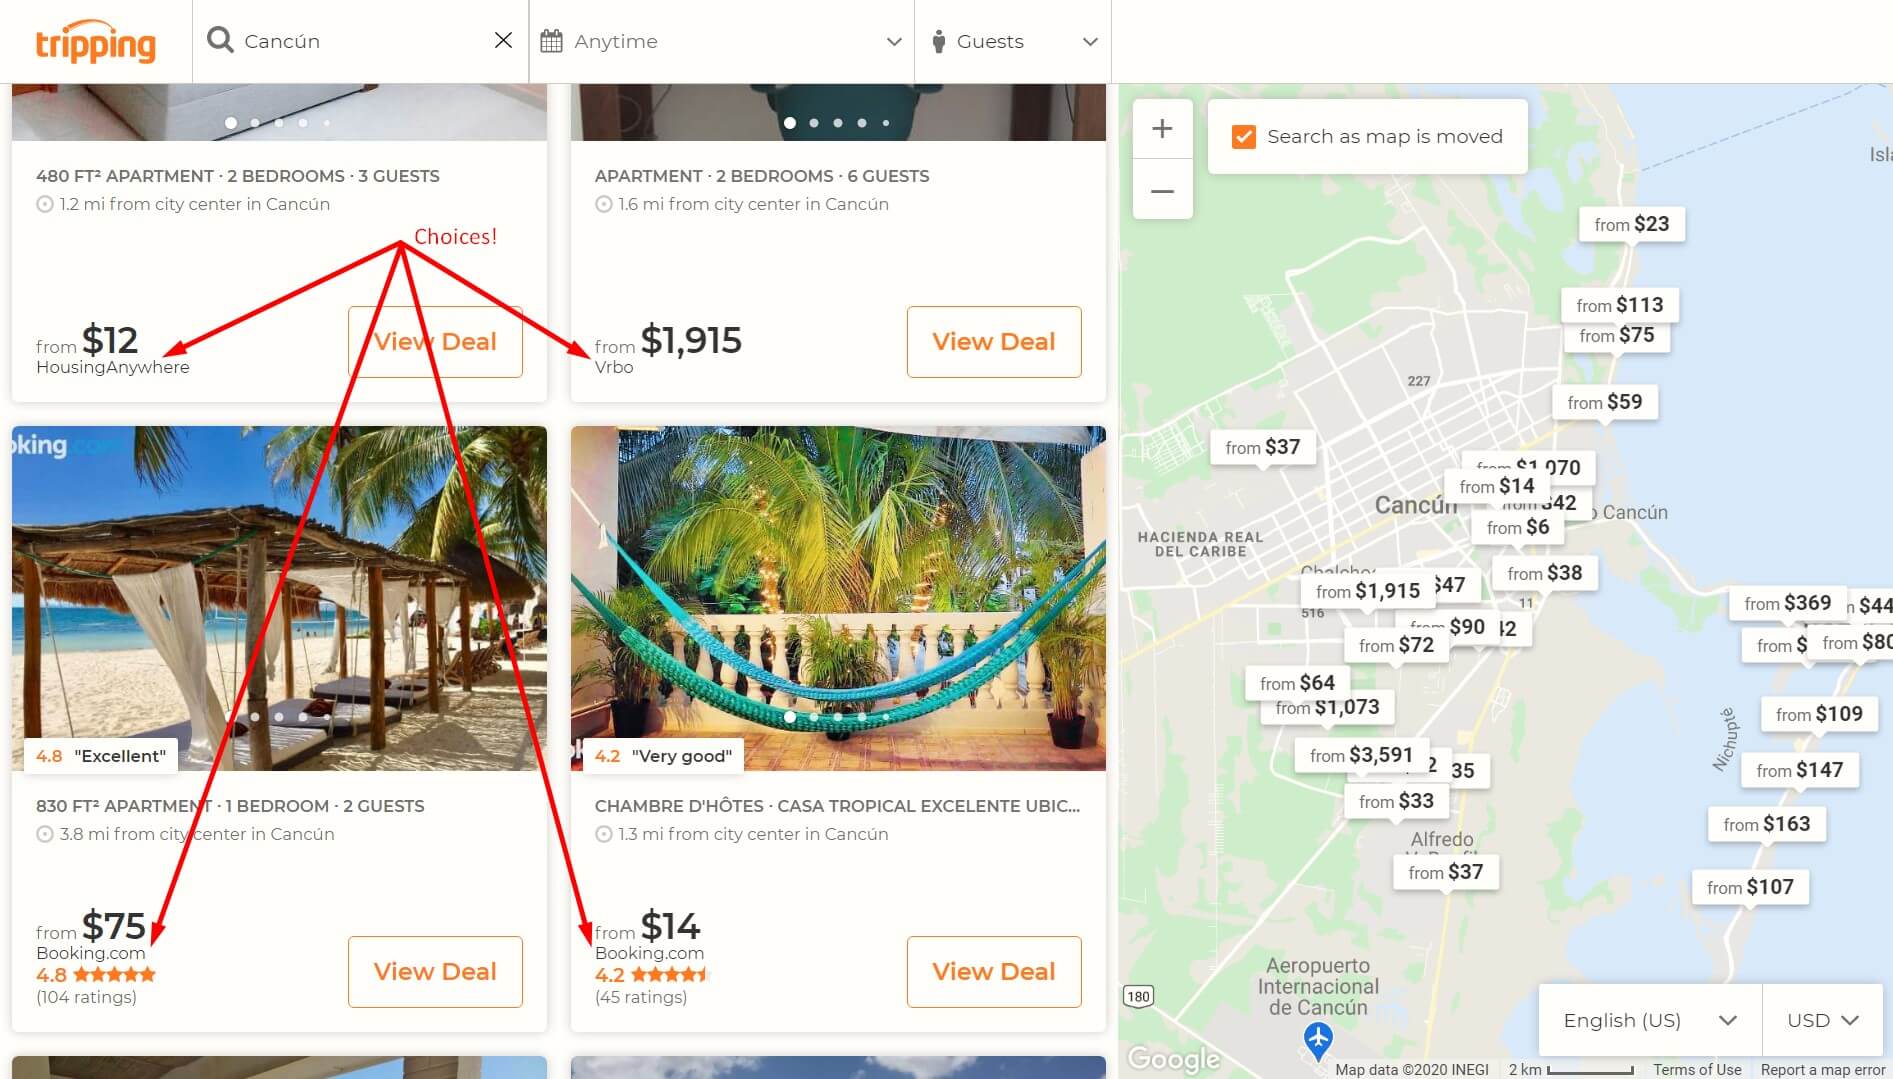 Tripping.com's search page - search engine for comapring Airbnb alternatives